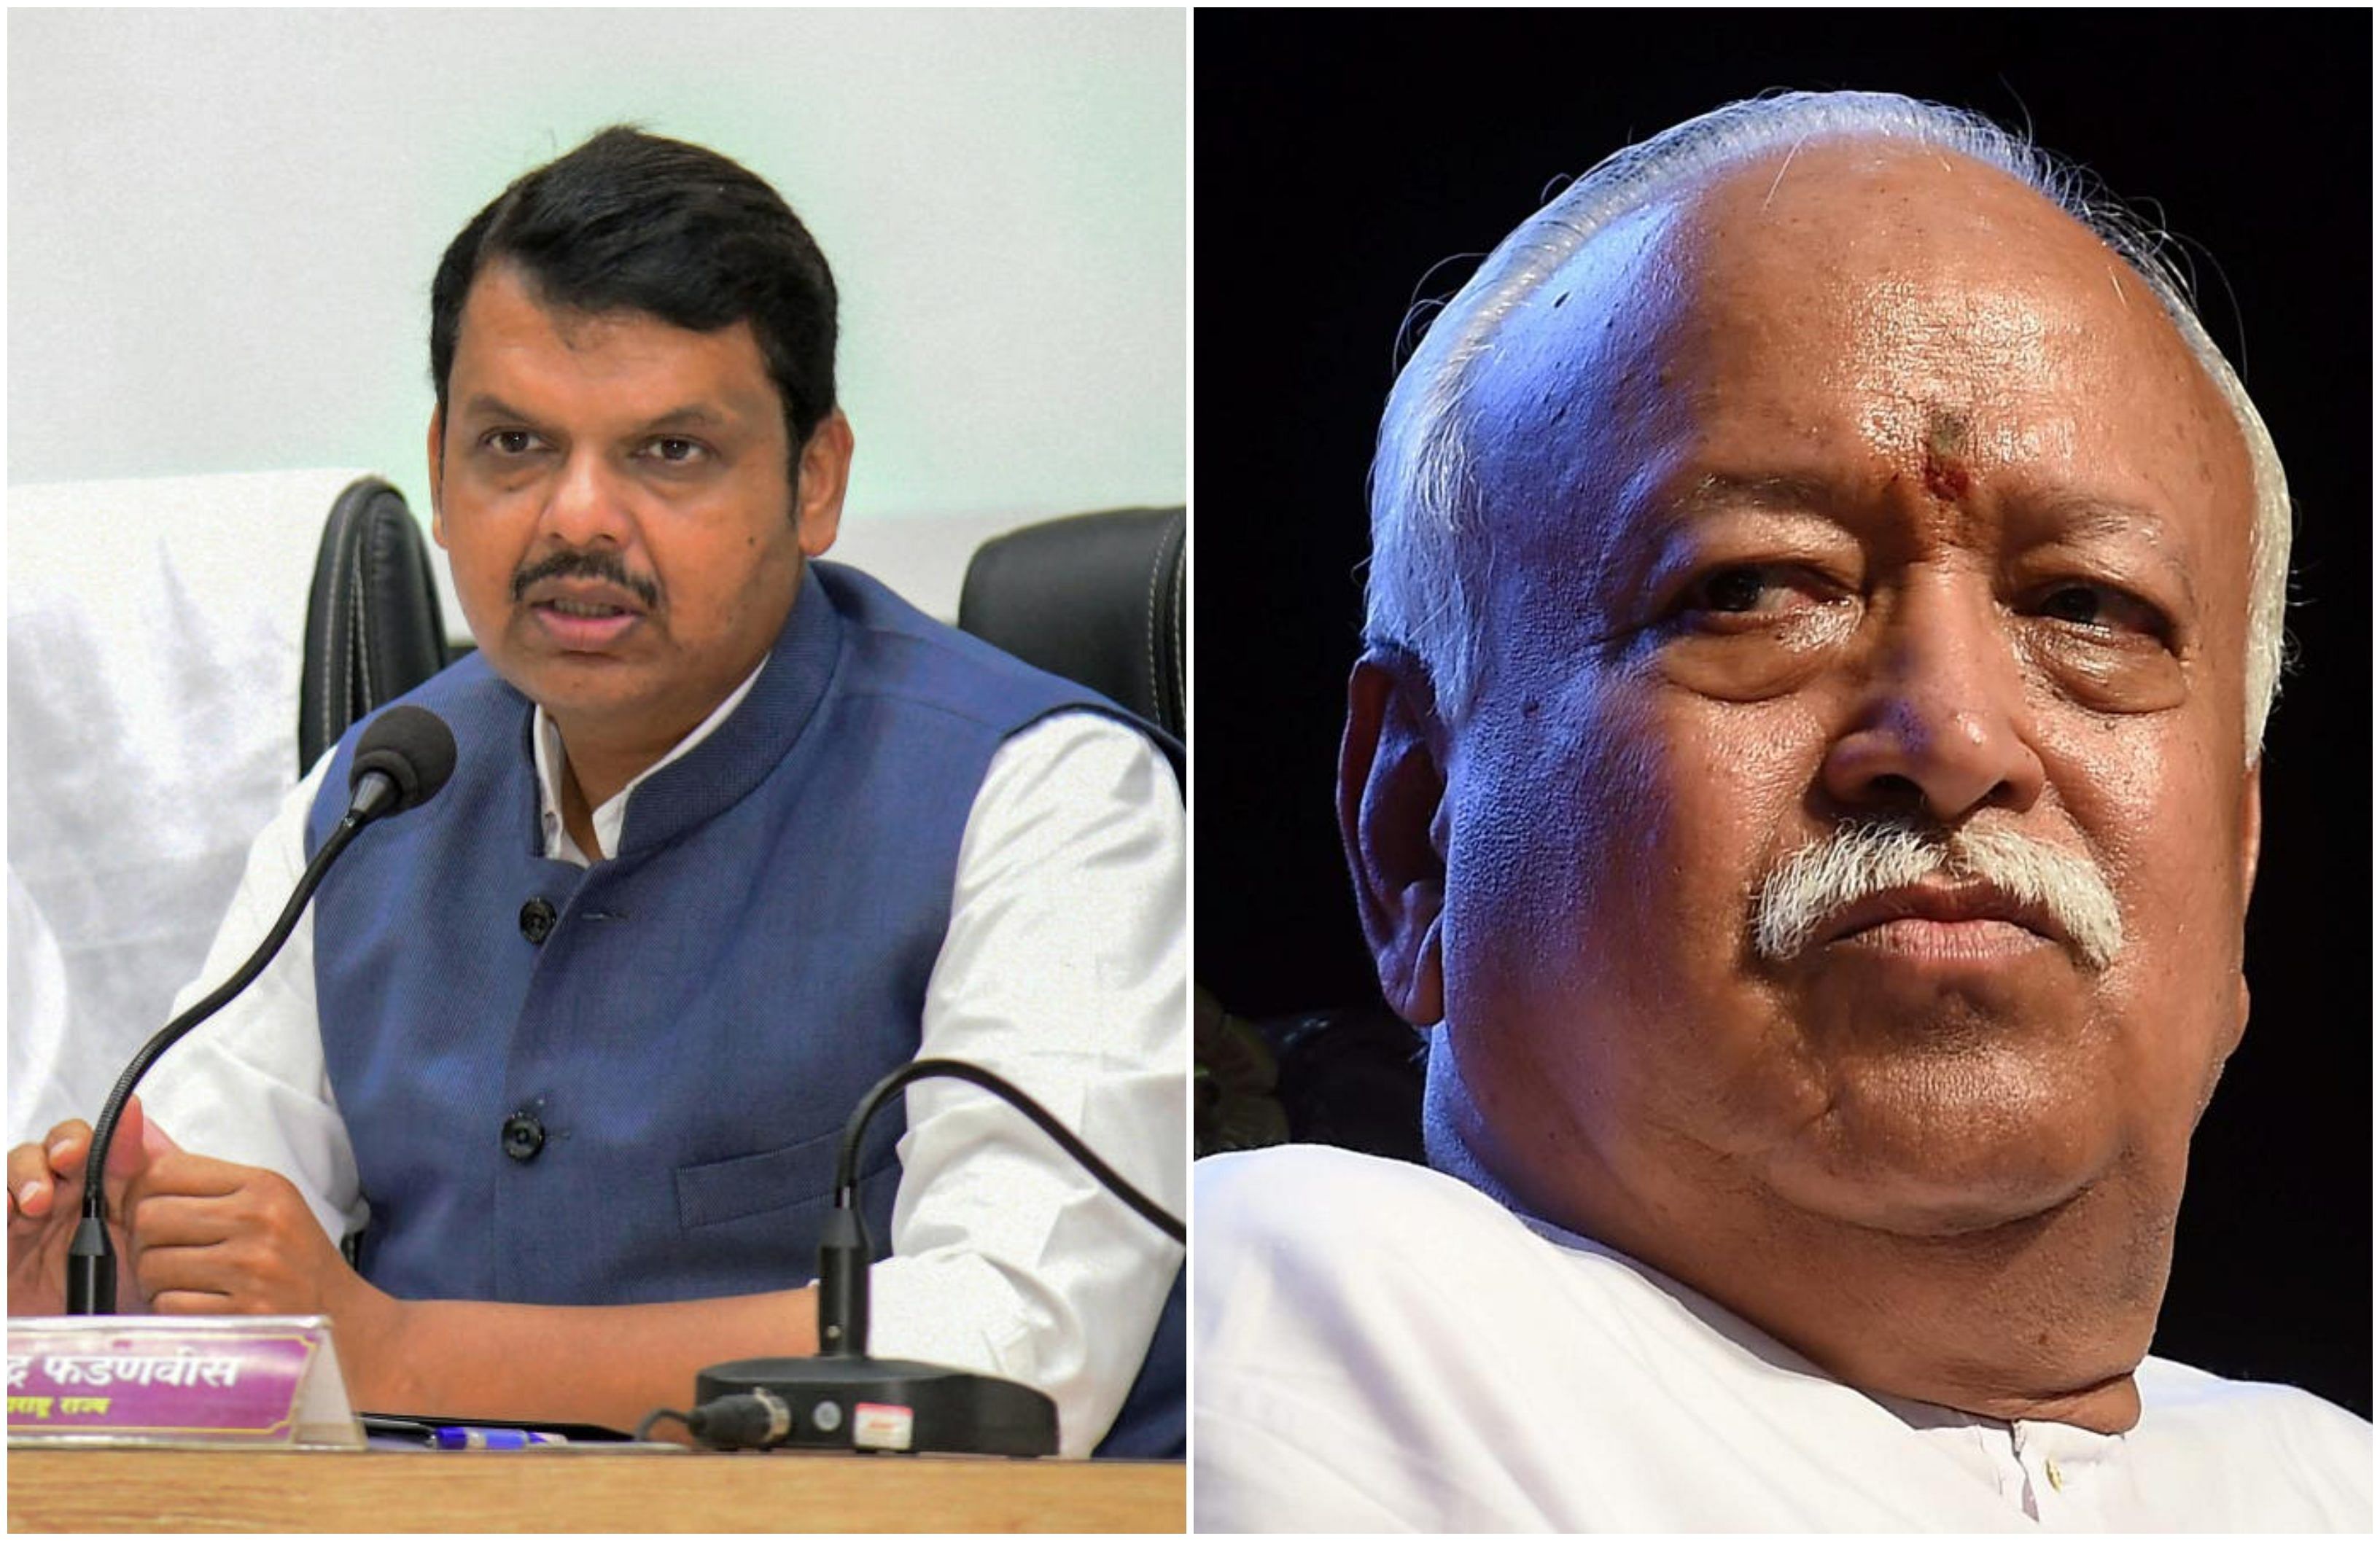 RSS functionaries in Nagpur were tight-lipped about what transpired at the meeting, though it is being speculated that the meeting was about the political deadlock in the state after the October 21 assembly elections.